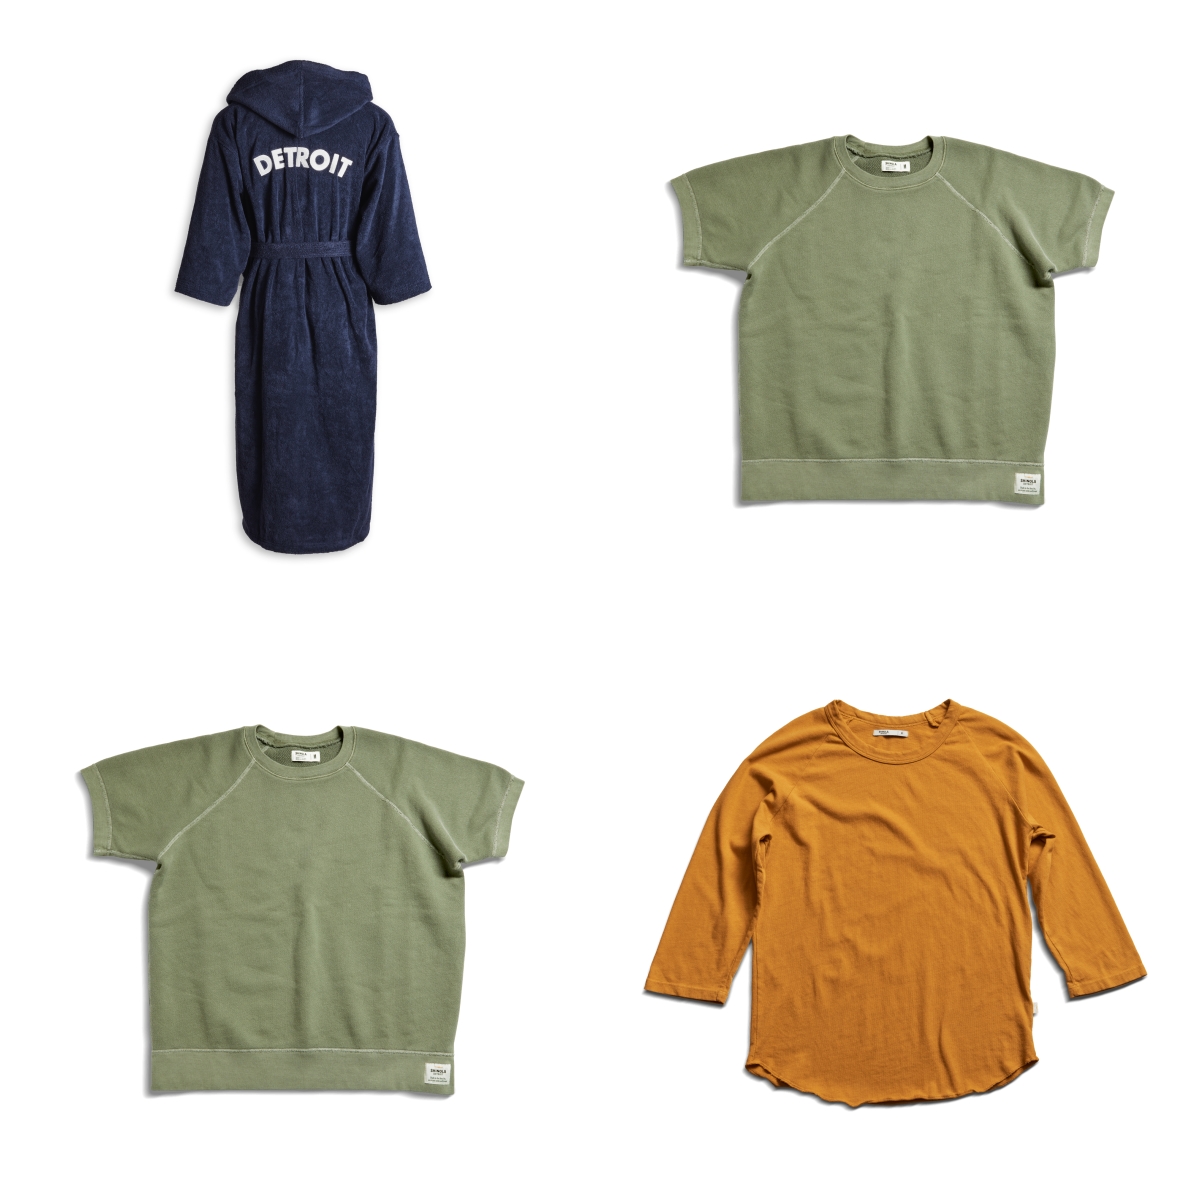 Stay Trendy And Stylish With The 8 Apparel And Accessories From Shinola